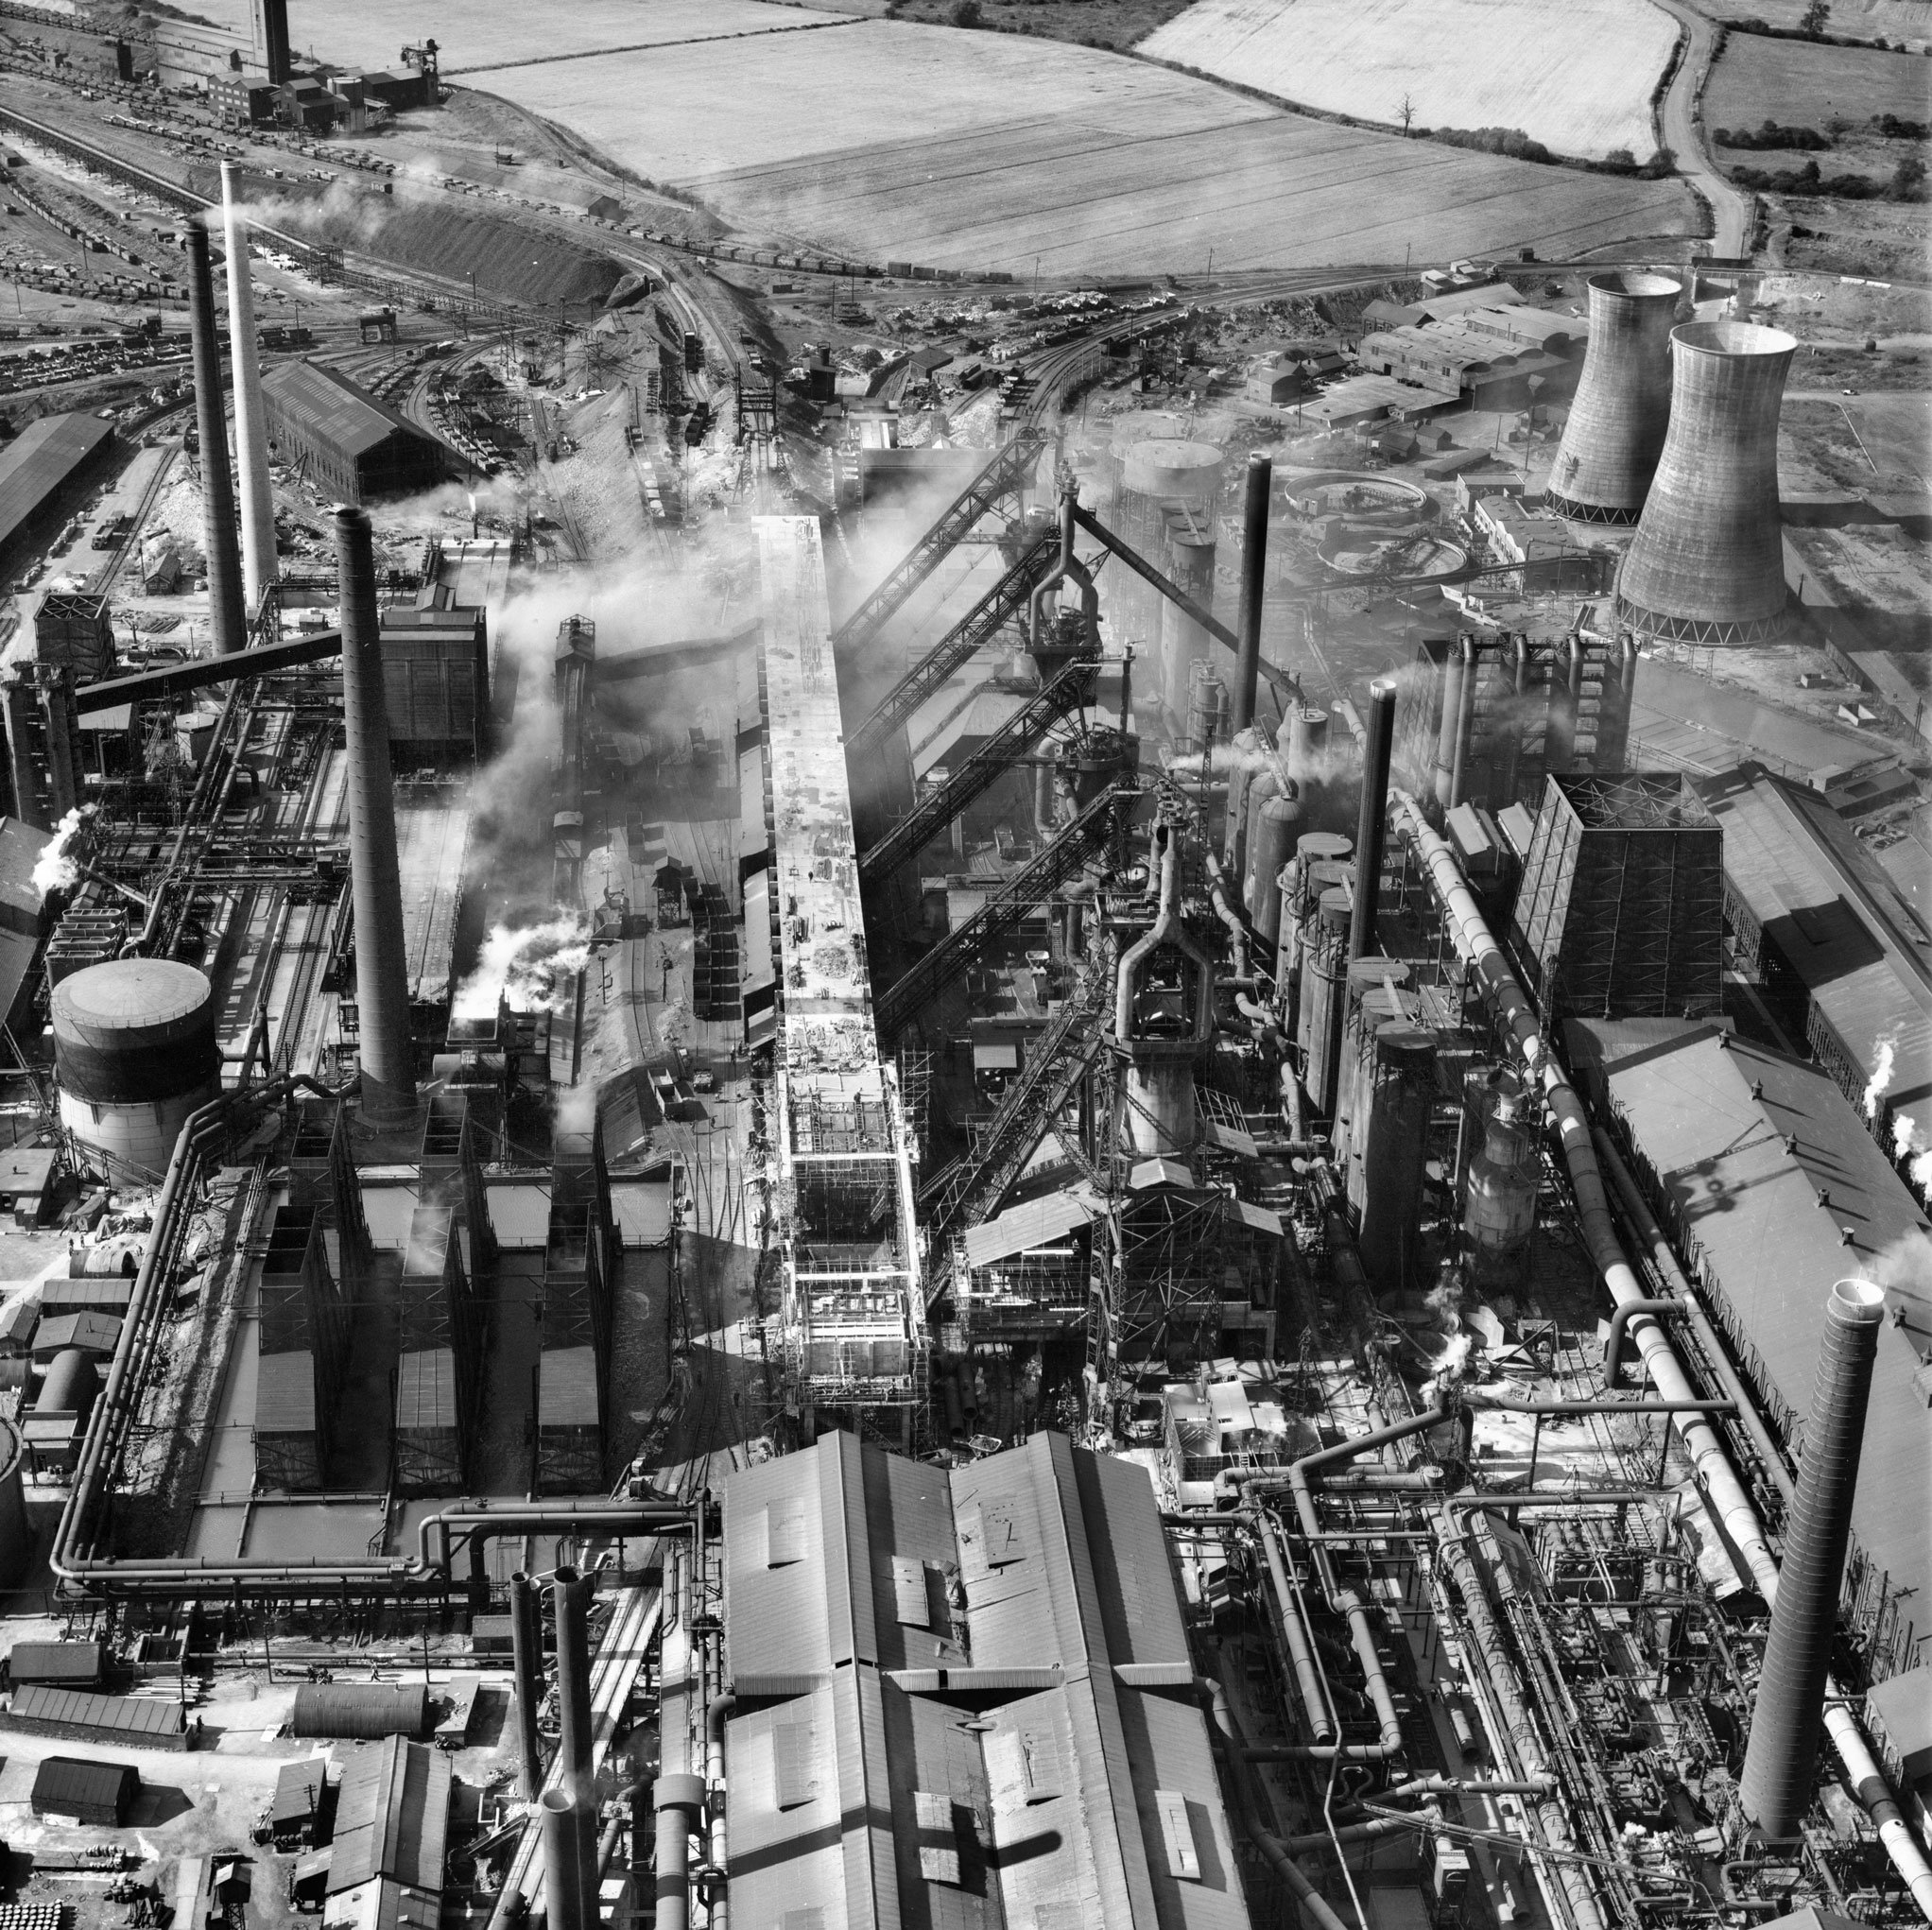 A black and white aerial photograph showing an industrial complex with workshops, chimneys and cooling towers.